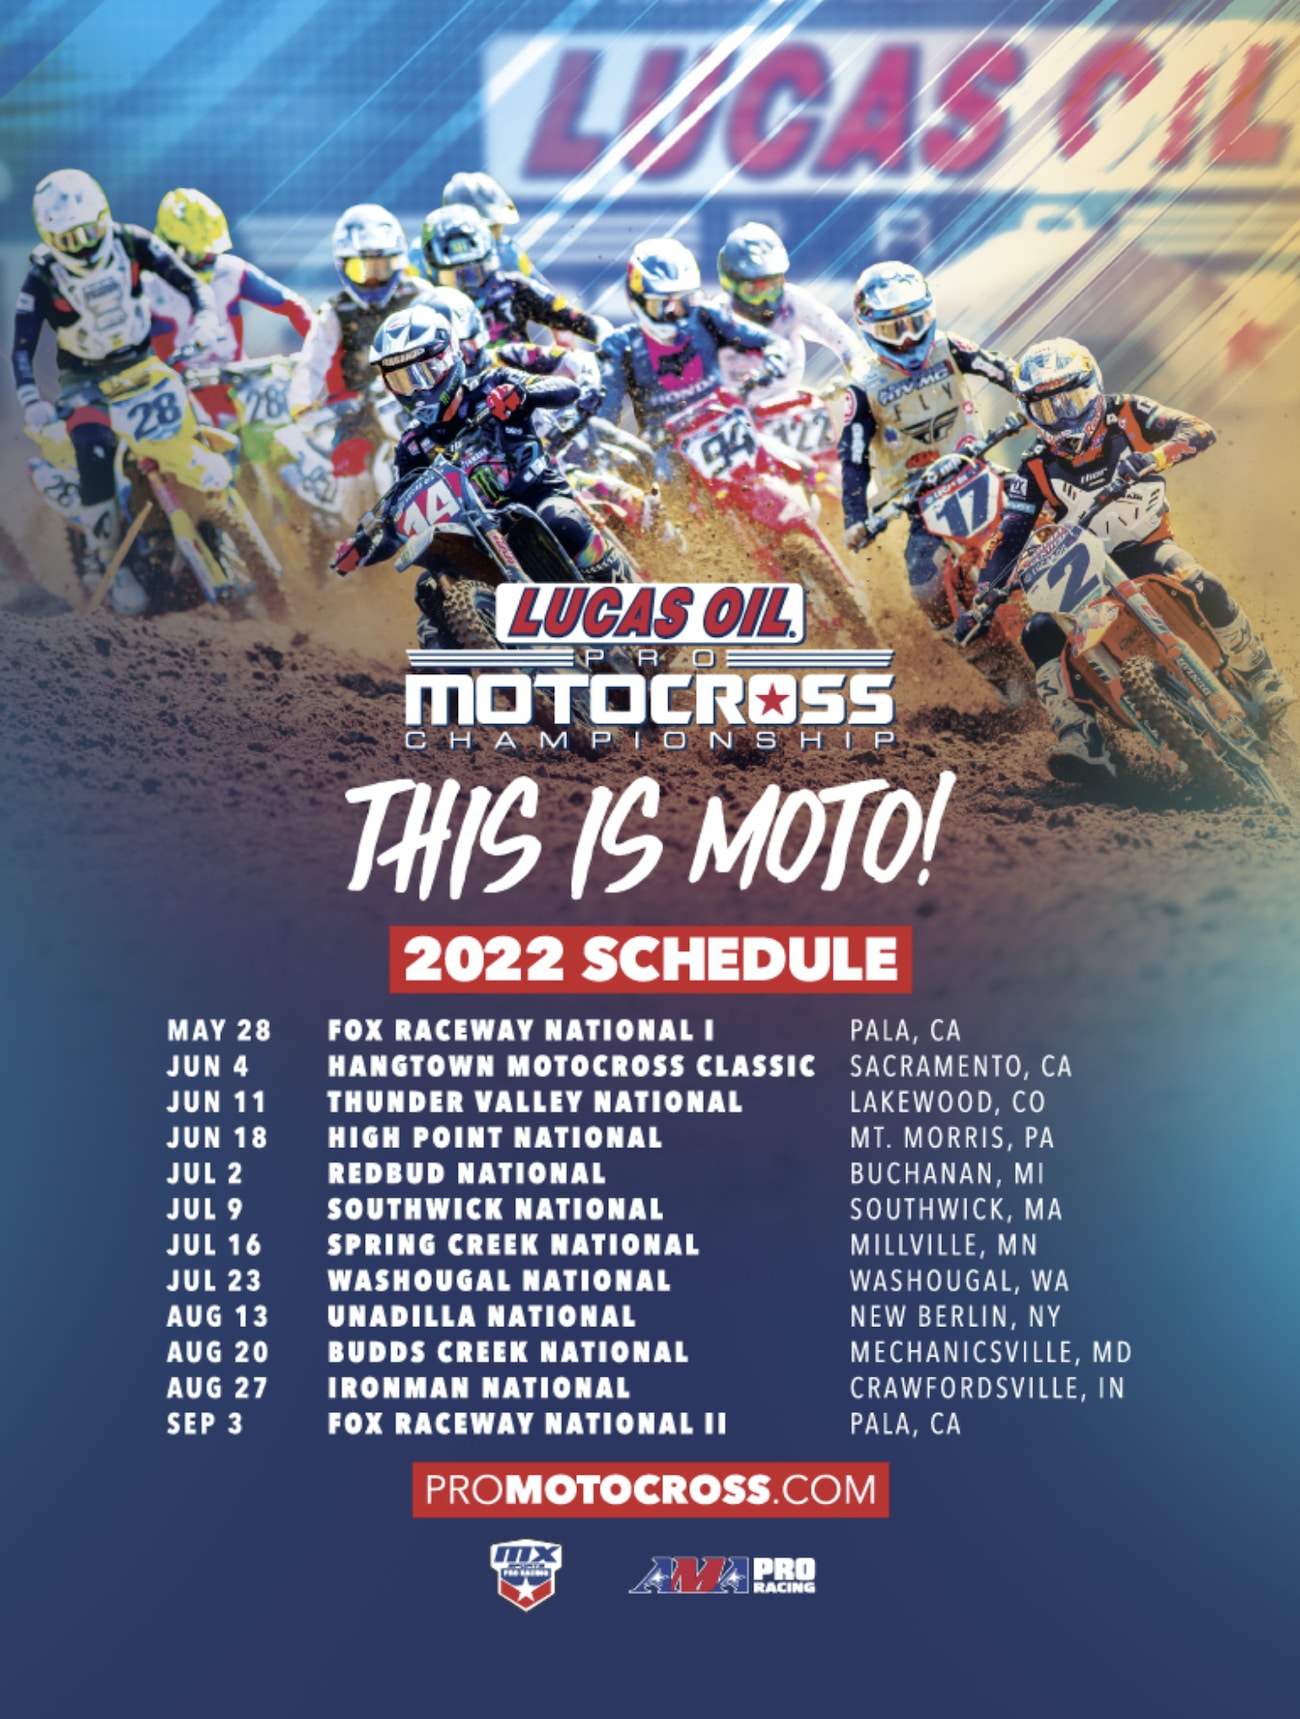 Nationals 2022 Schedule 2022 Ama Pro Motocross Schedule: Starts At Pala On May 28, 2022 & Ends At  Pala On Sept. 3 - Motocross Action Magazine